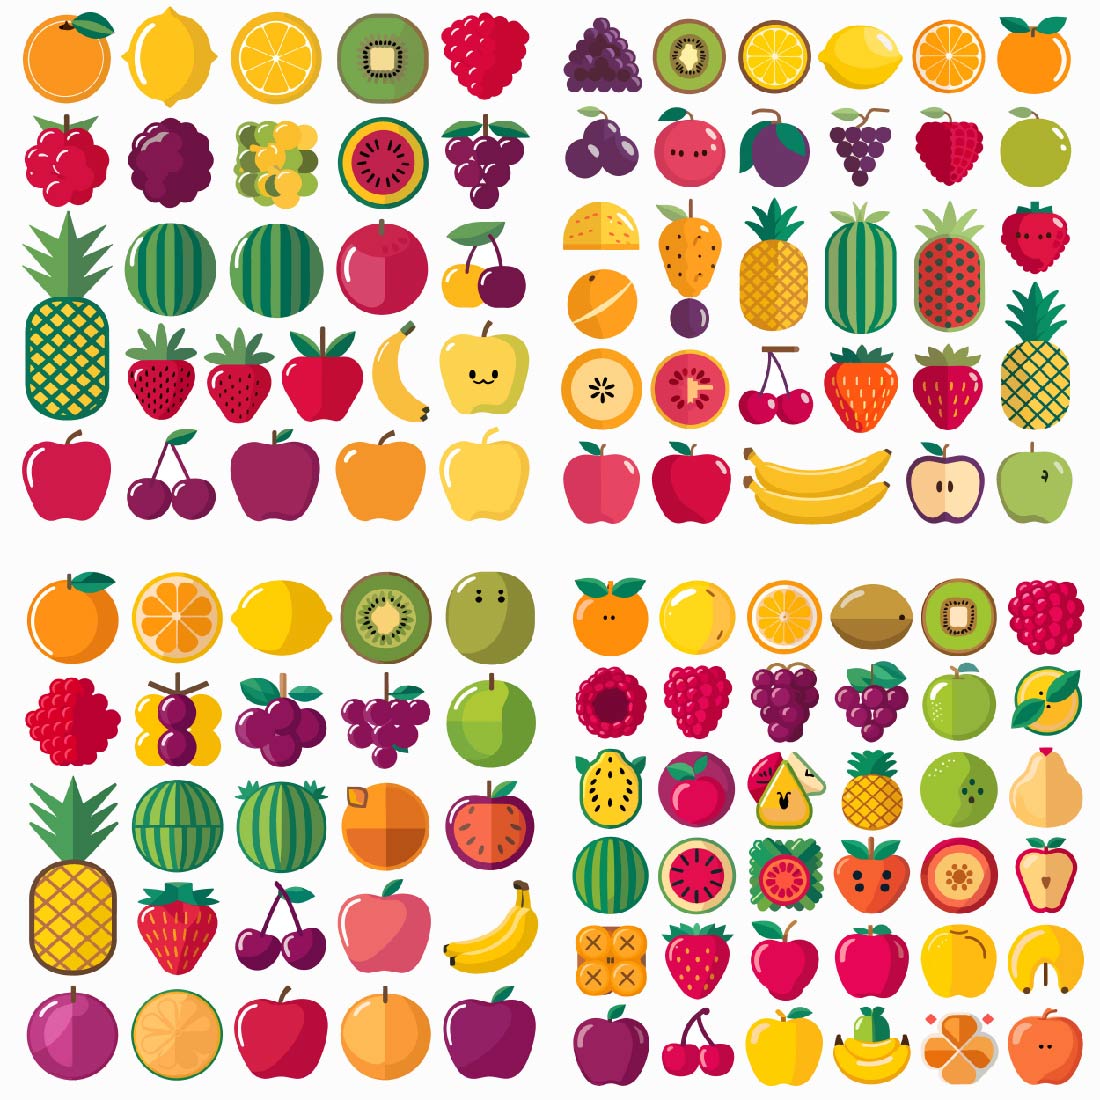 4 big collections of fruit icons preview image.